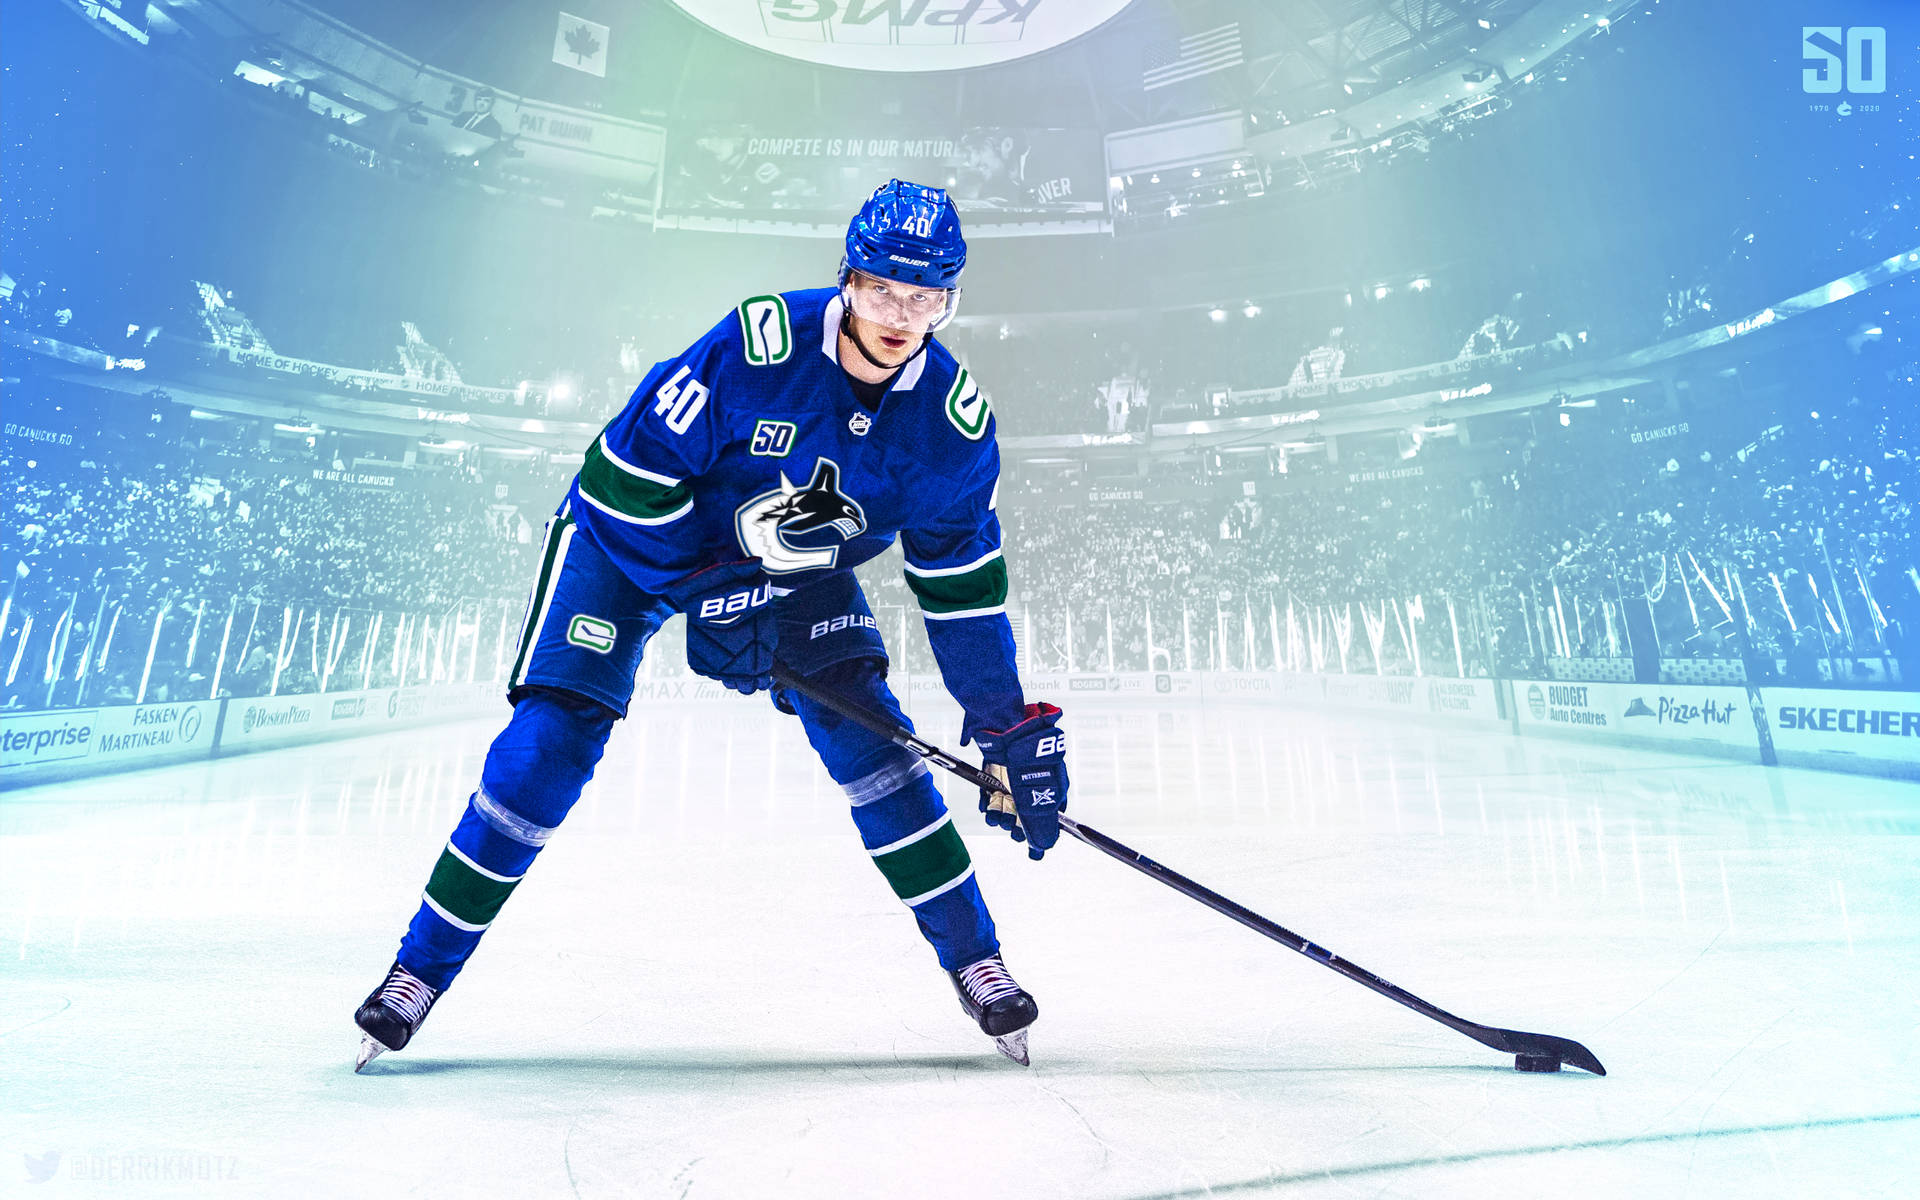 Made a darker Pettersson wallpaper. More devices as well : r/canucks